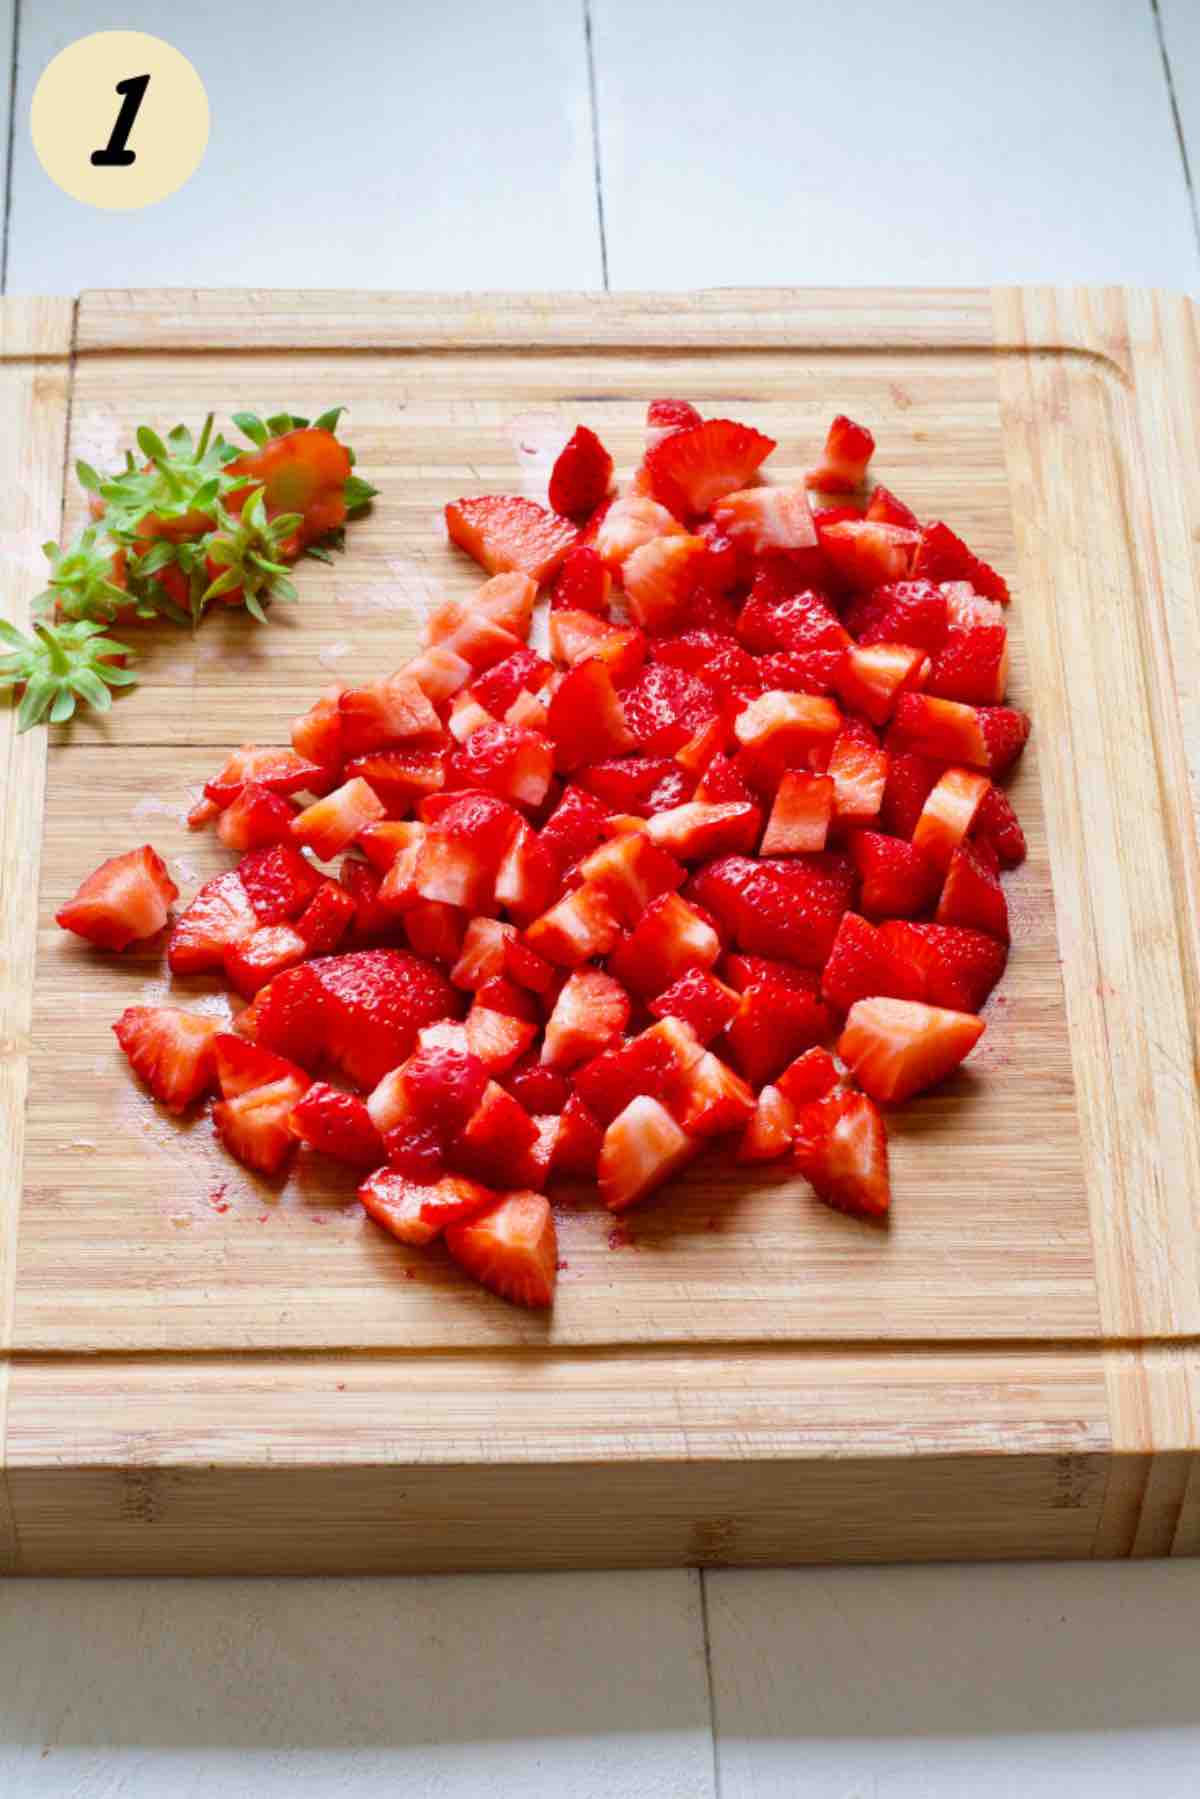 Hulled and chopped strawberries on a wooden board.